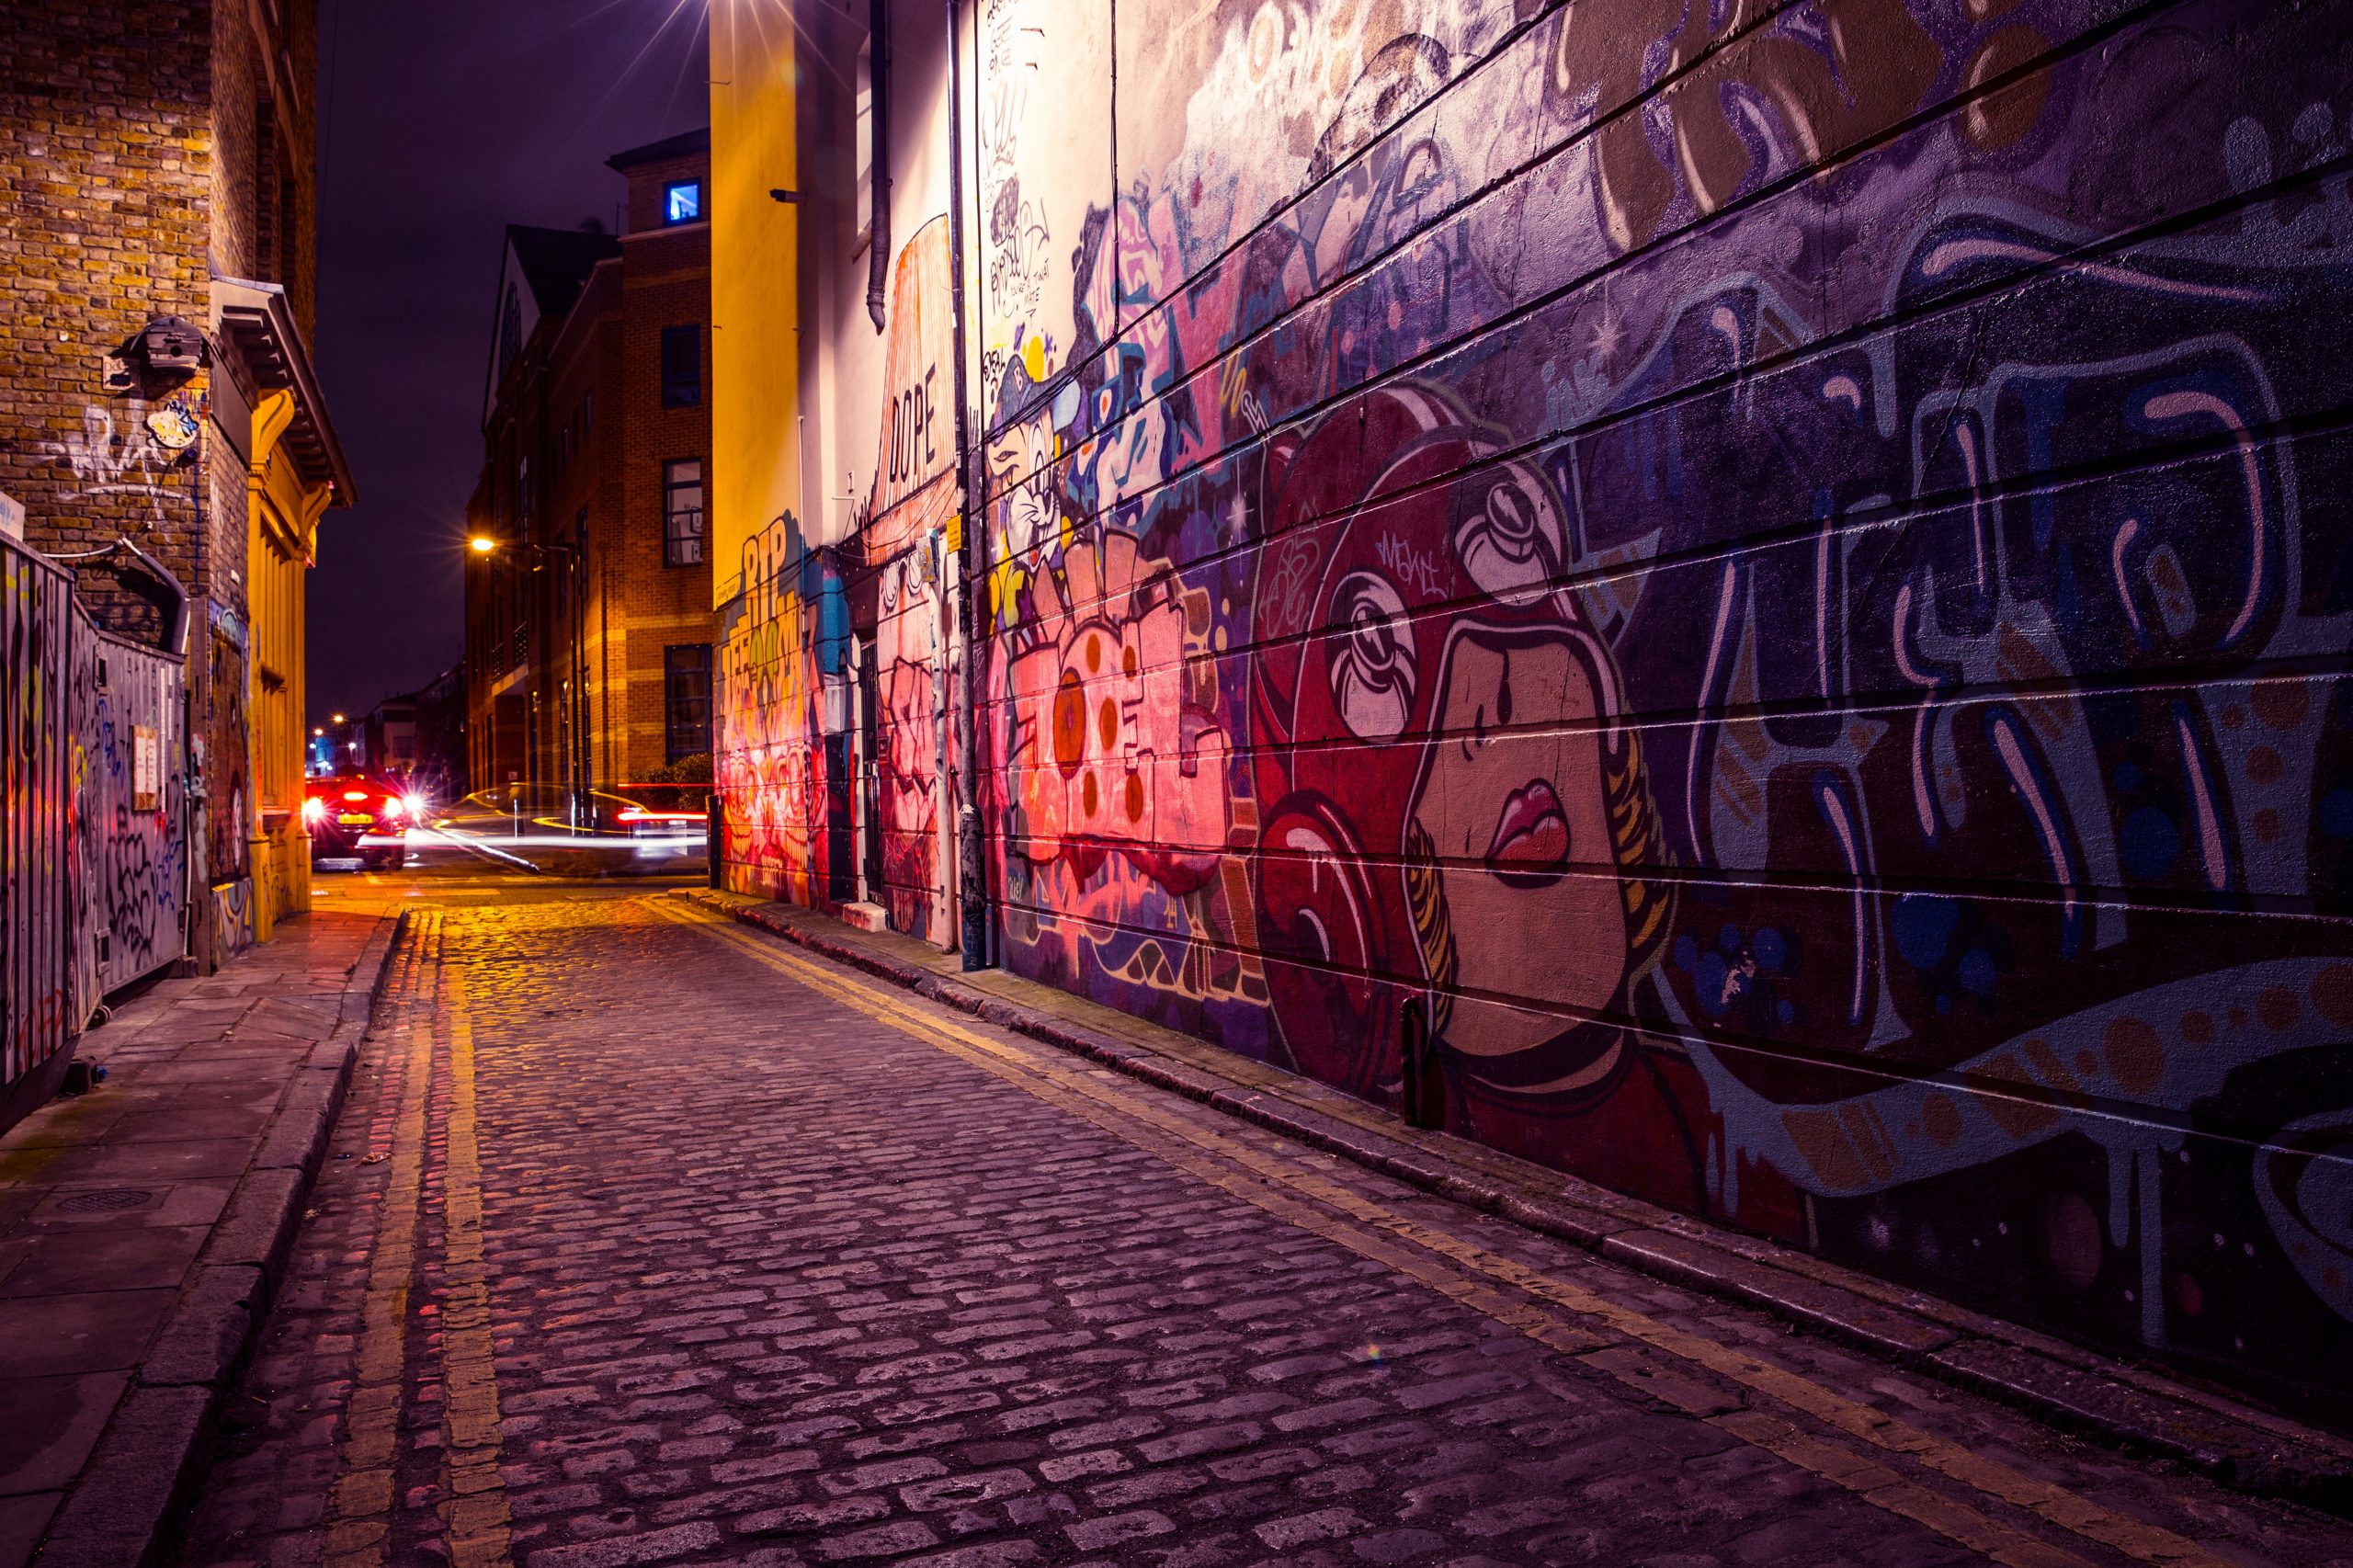 City side street with street art and graffiti captured by night wallpaper